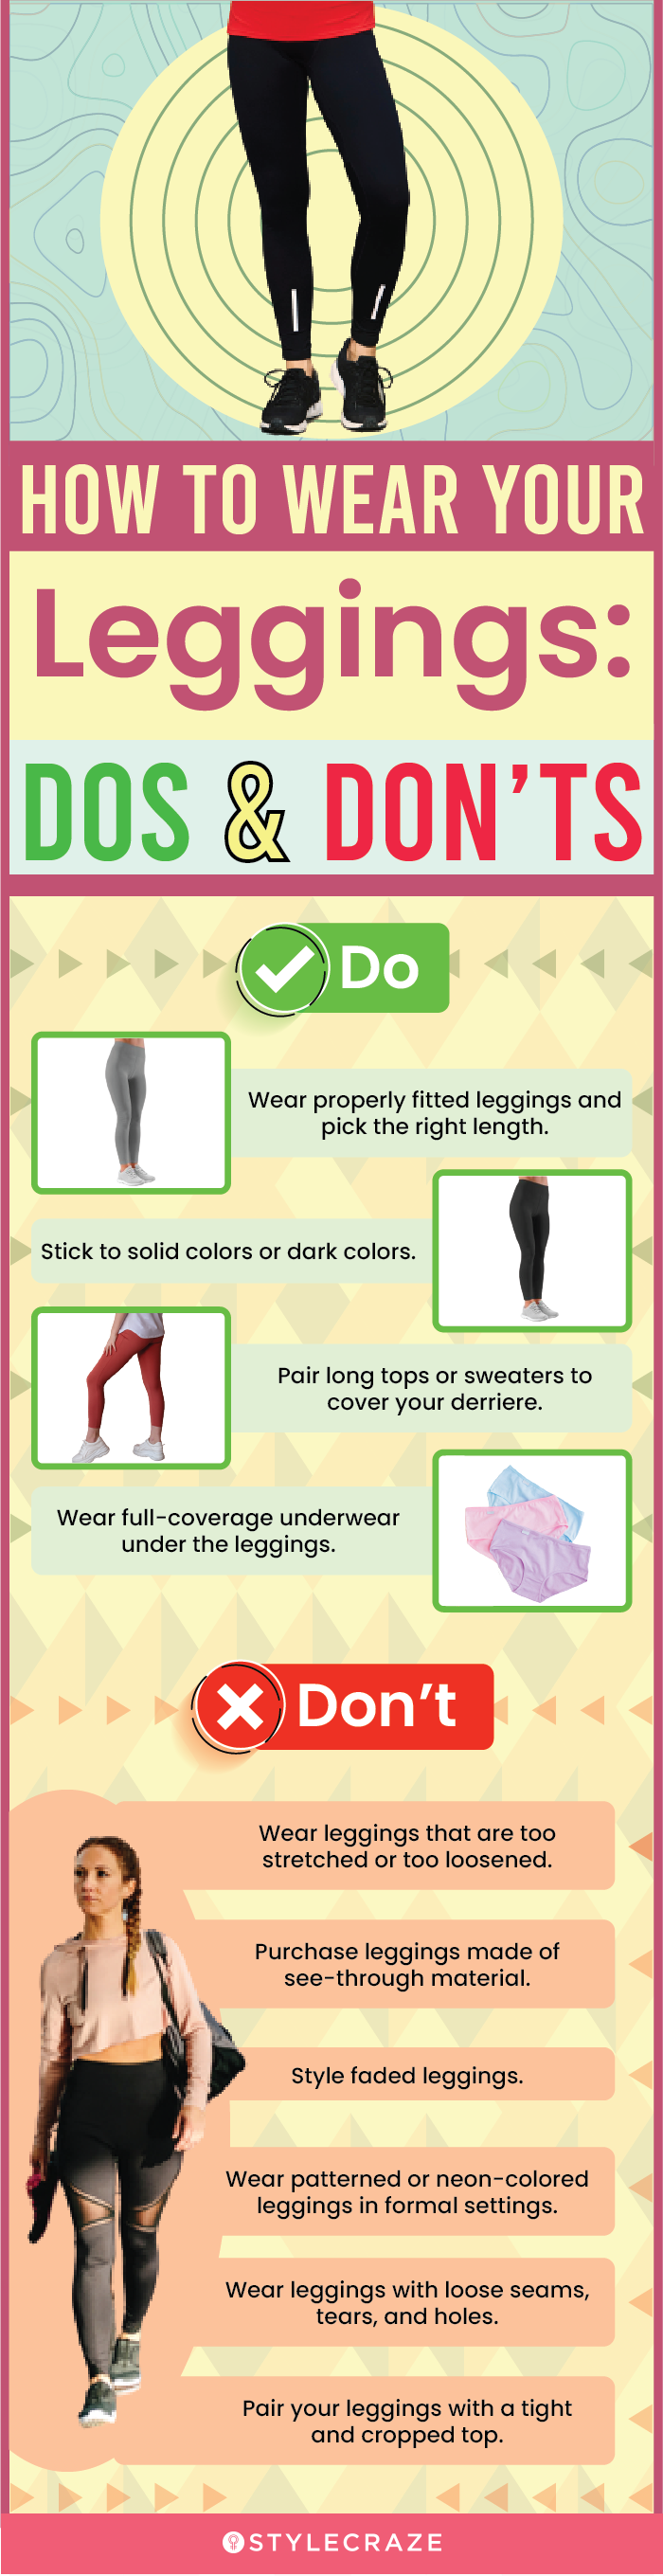 How To Wear Your Leggings: Dos & Don’ts